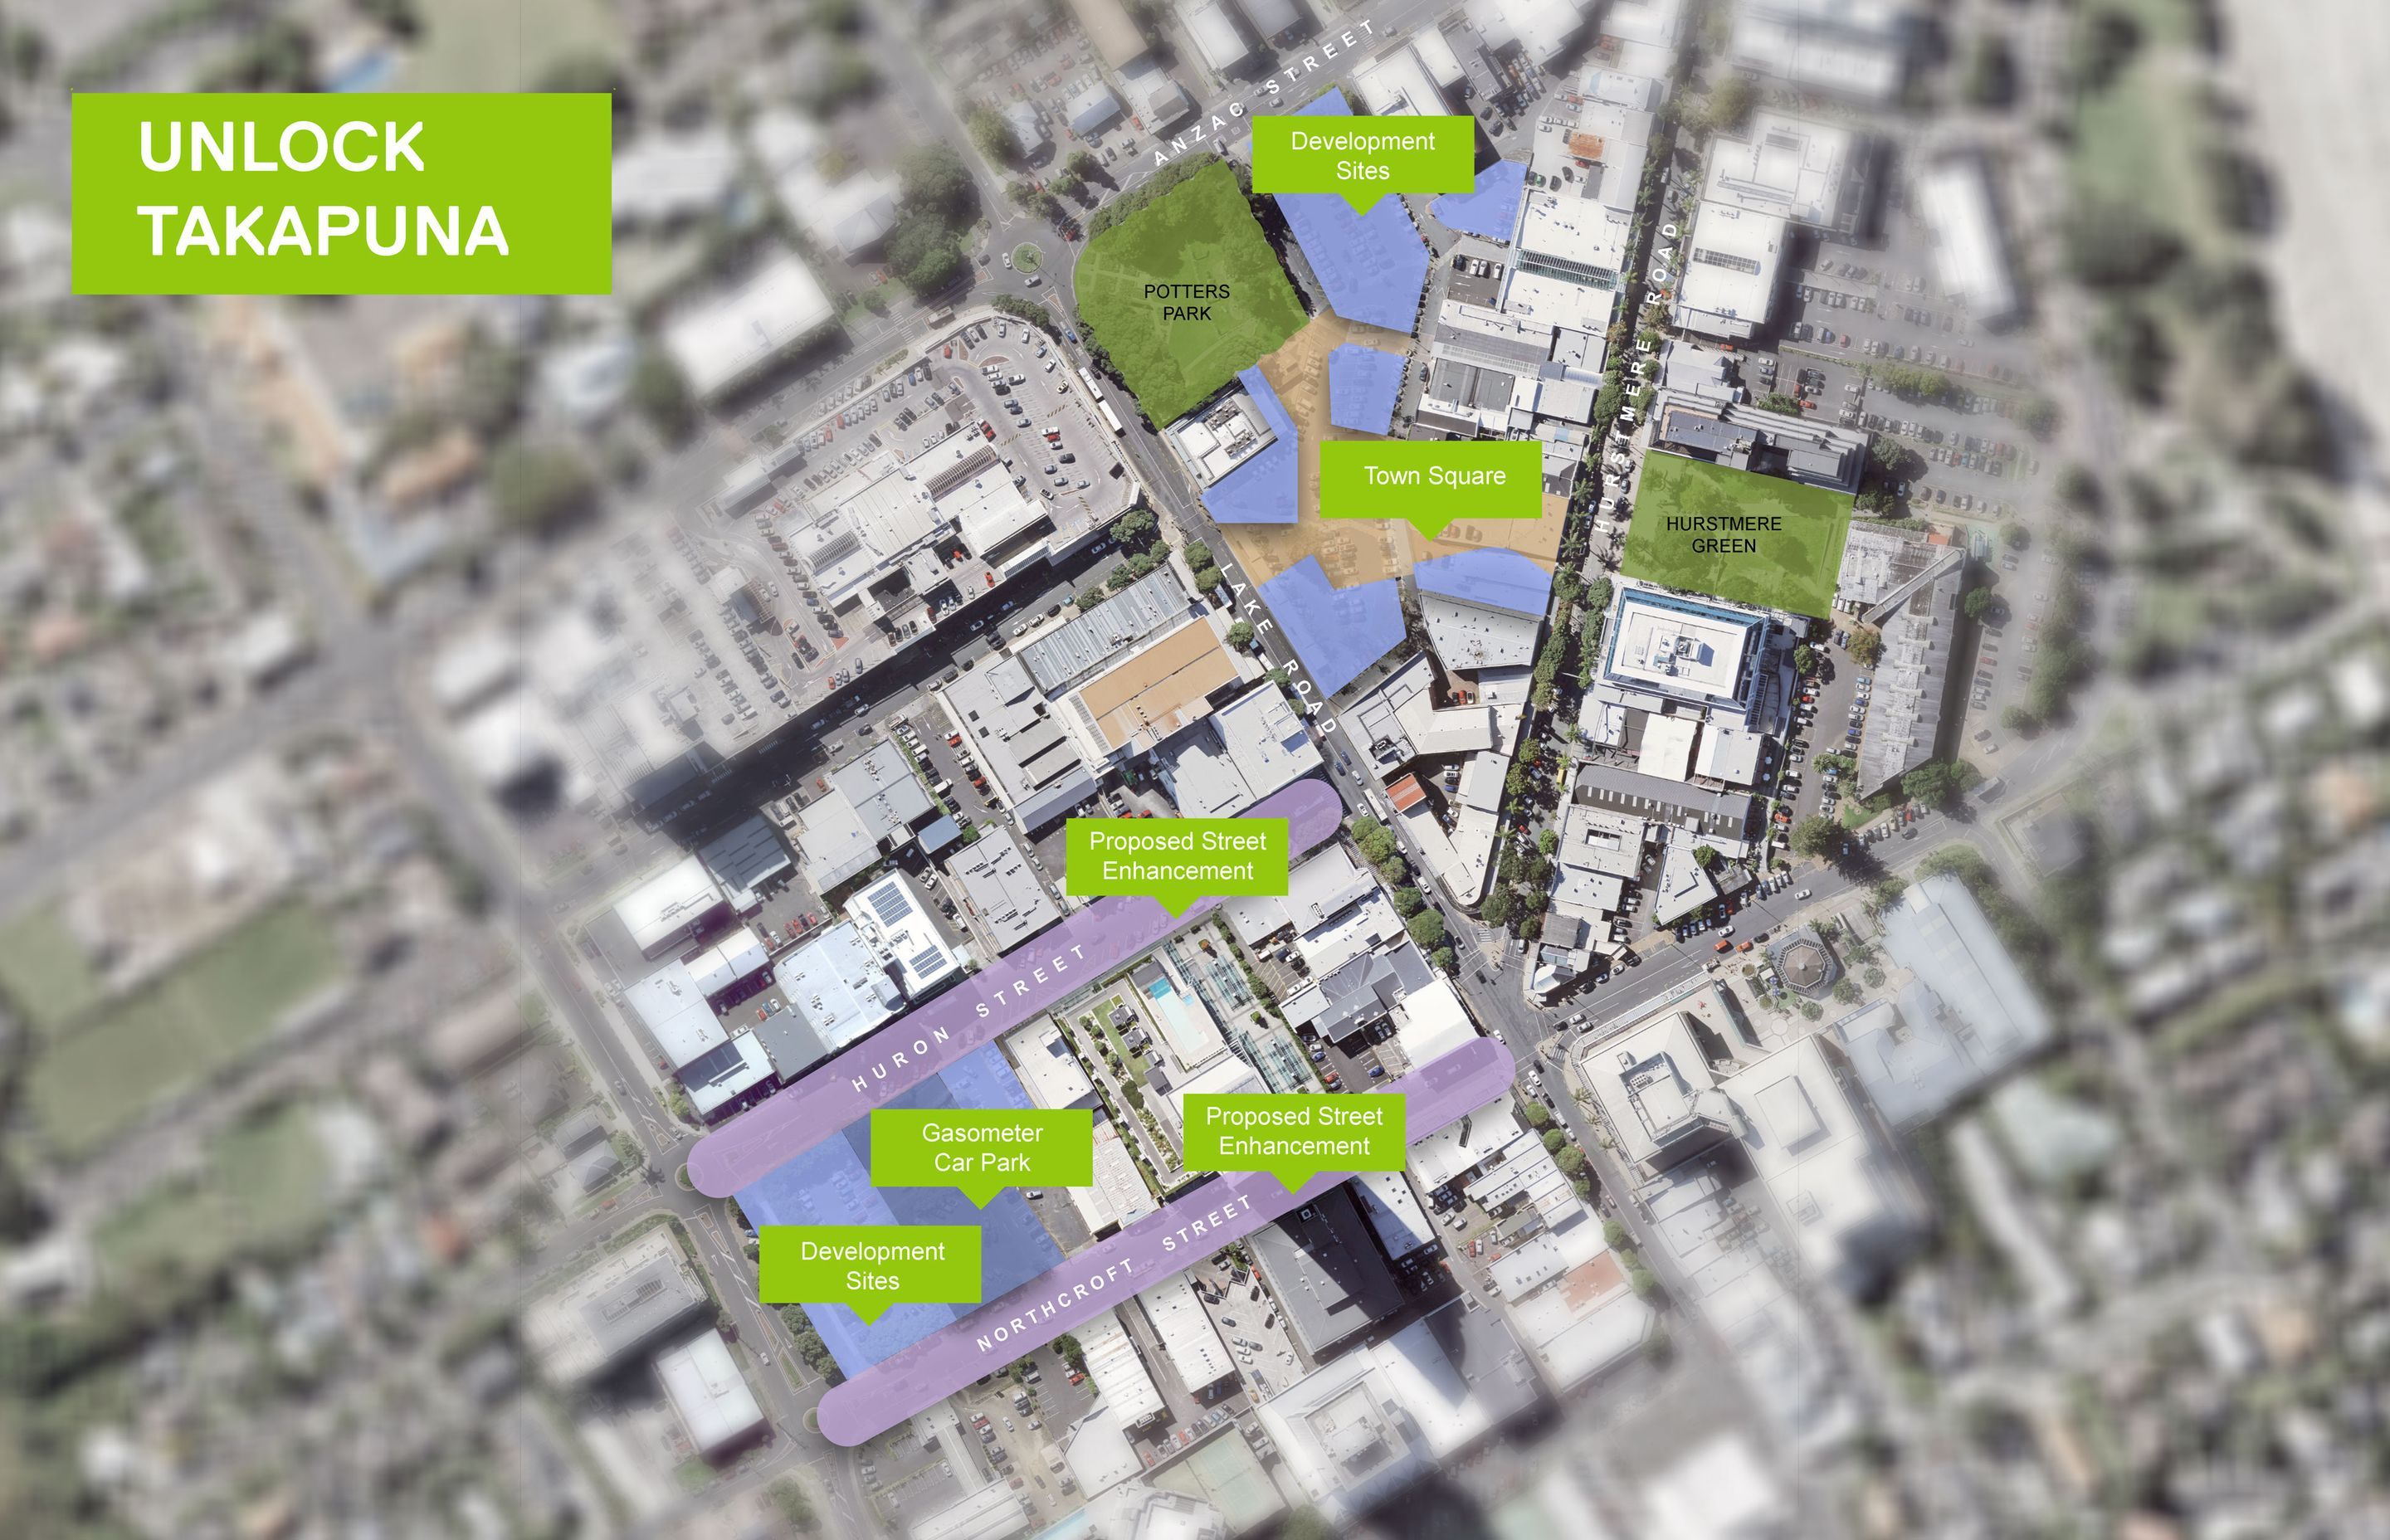 The Unlock Takapuna project incorporates a number of sites for development. Image: Panuku Development Auckland.